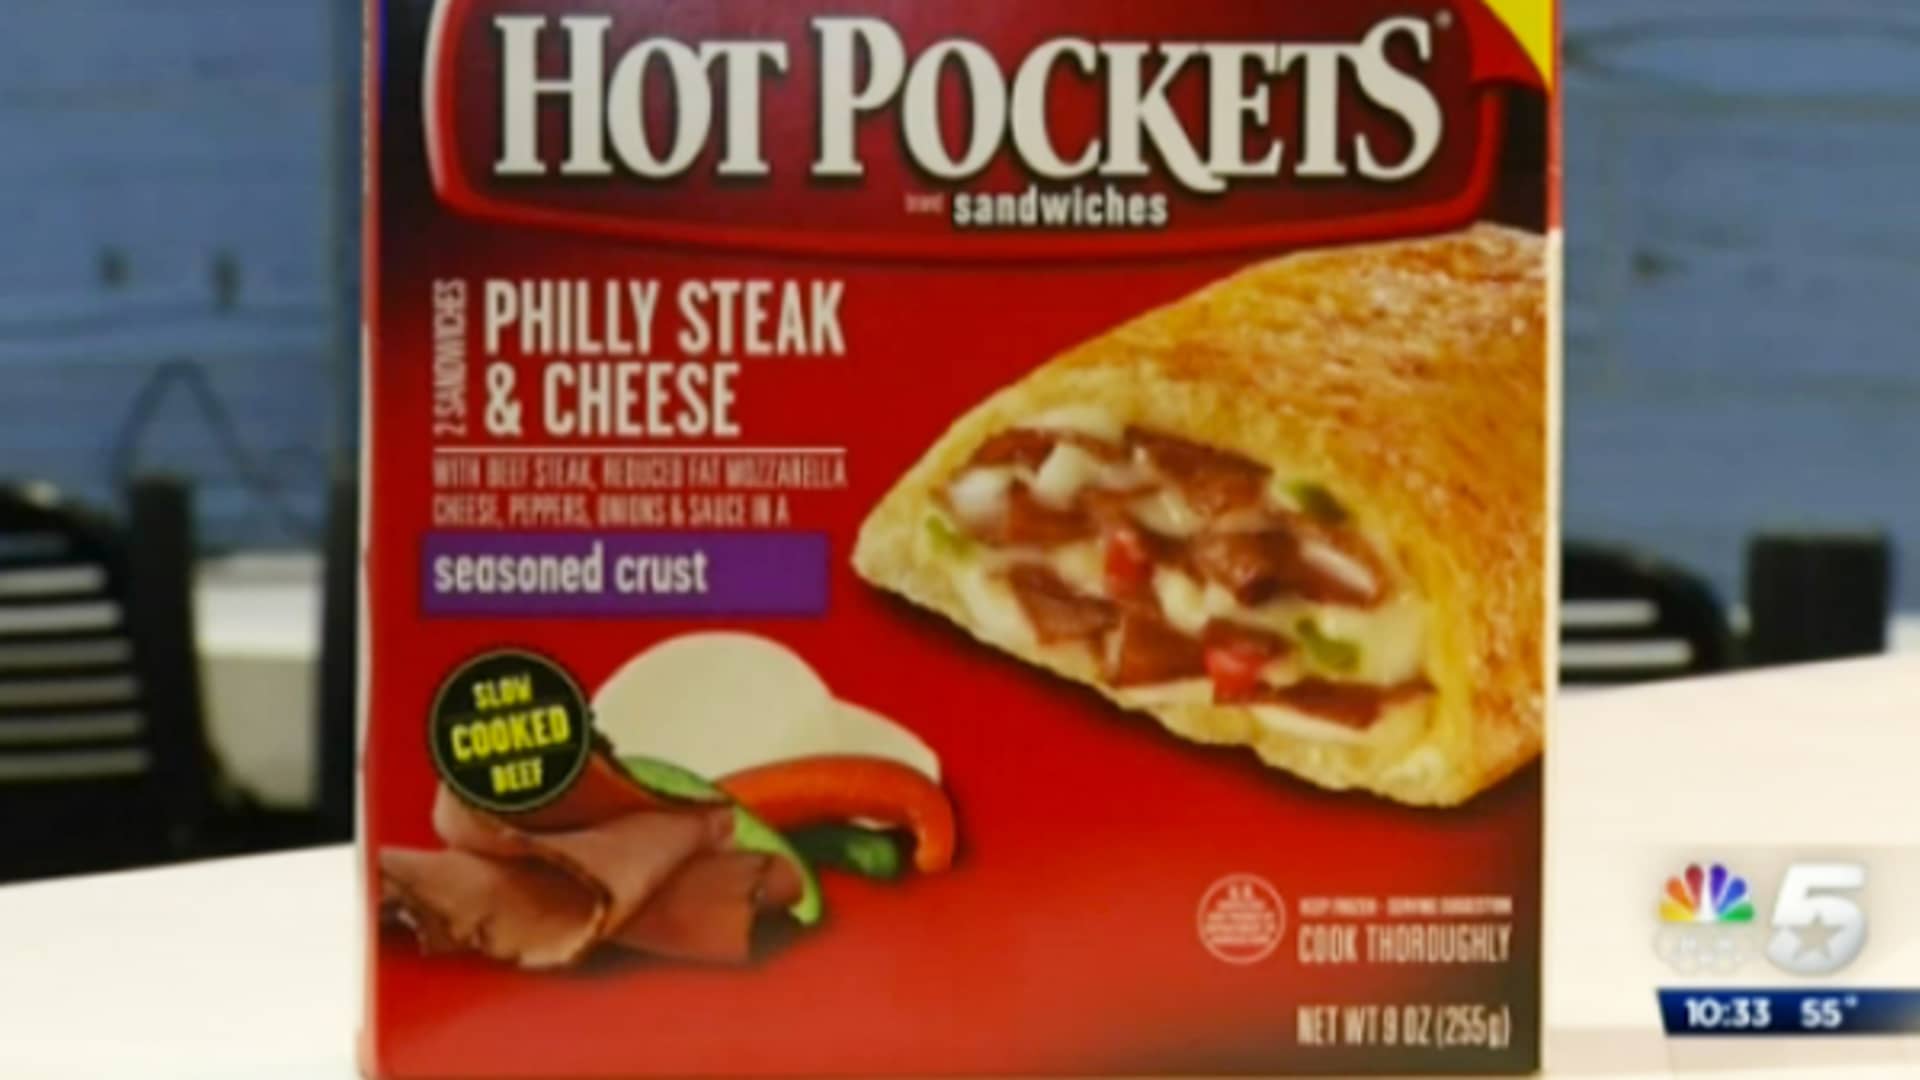 Hot Pockets recalled after meat found 'unfit for human food